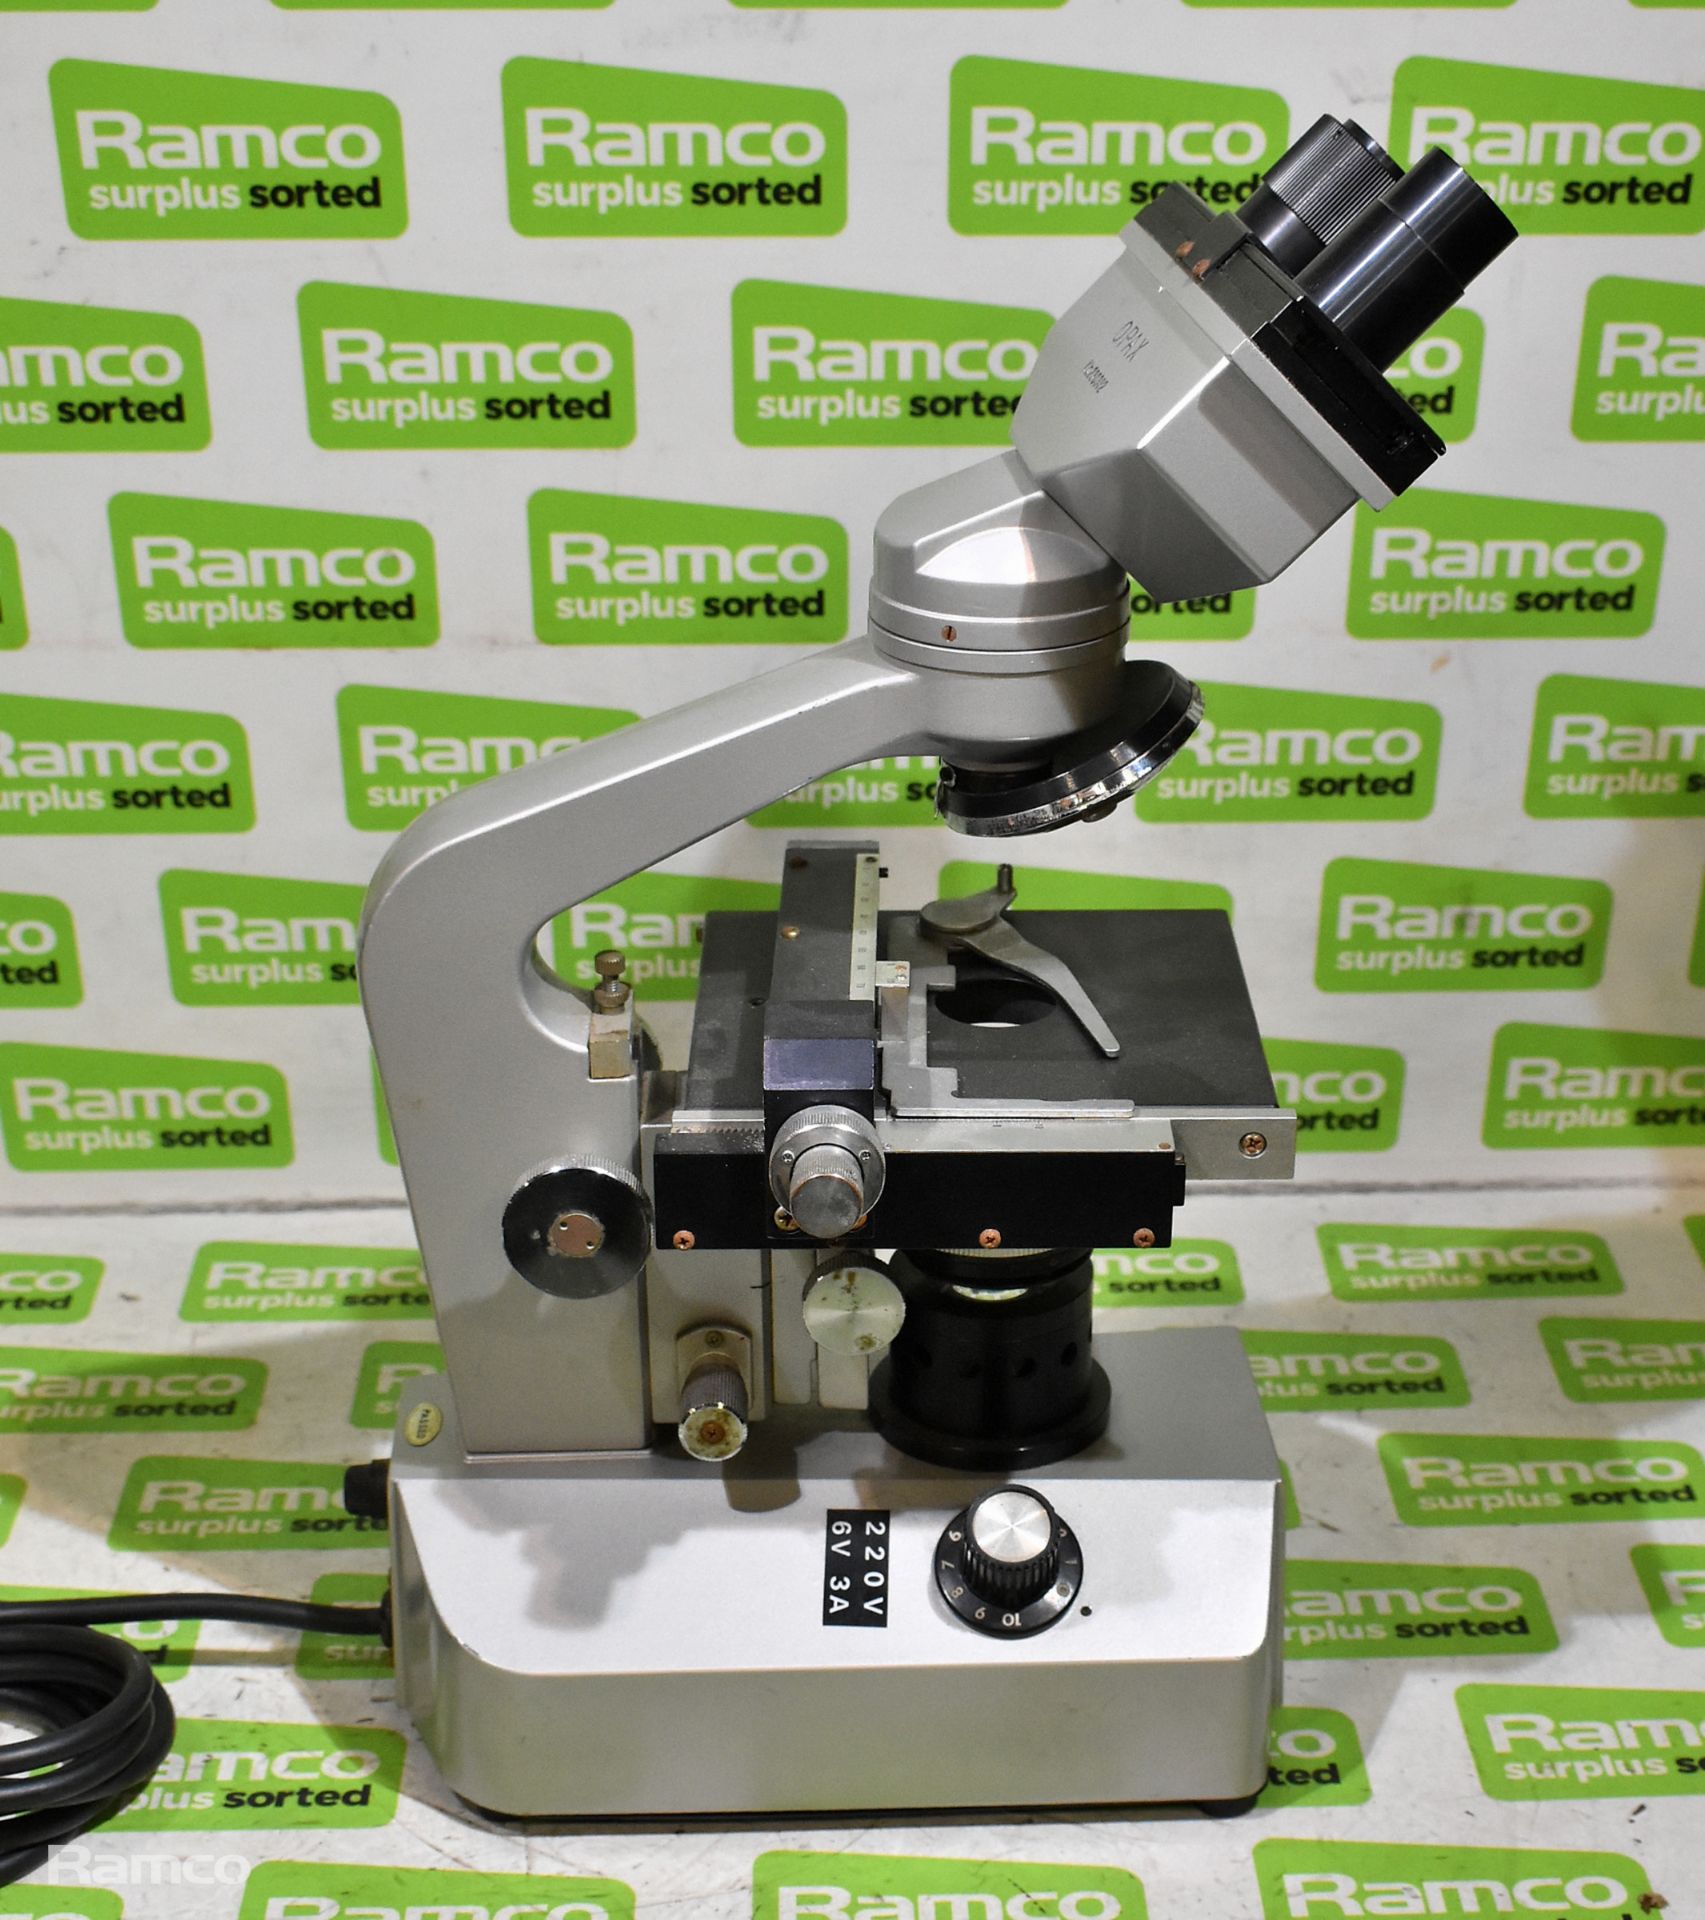 Opax stereomicroscope - Image 3 of 6